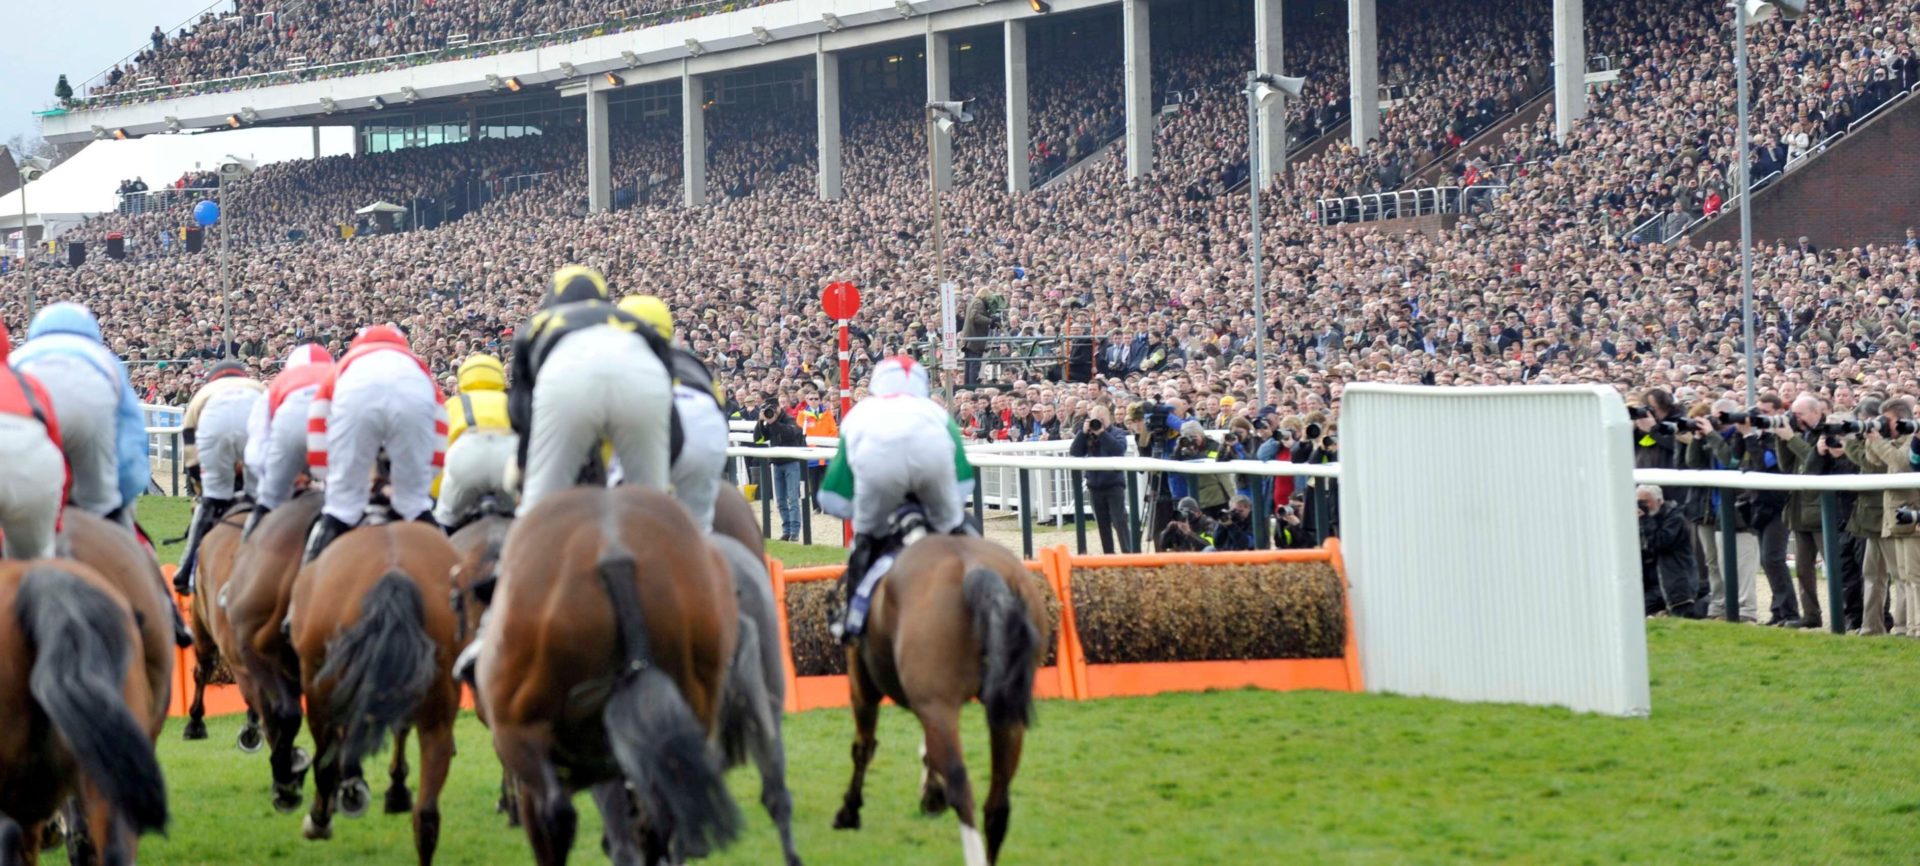 A race at Cheltenham, 10/3/09. Image: Independent / Alamy Stock Photo